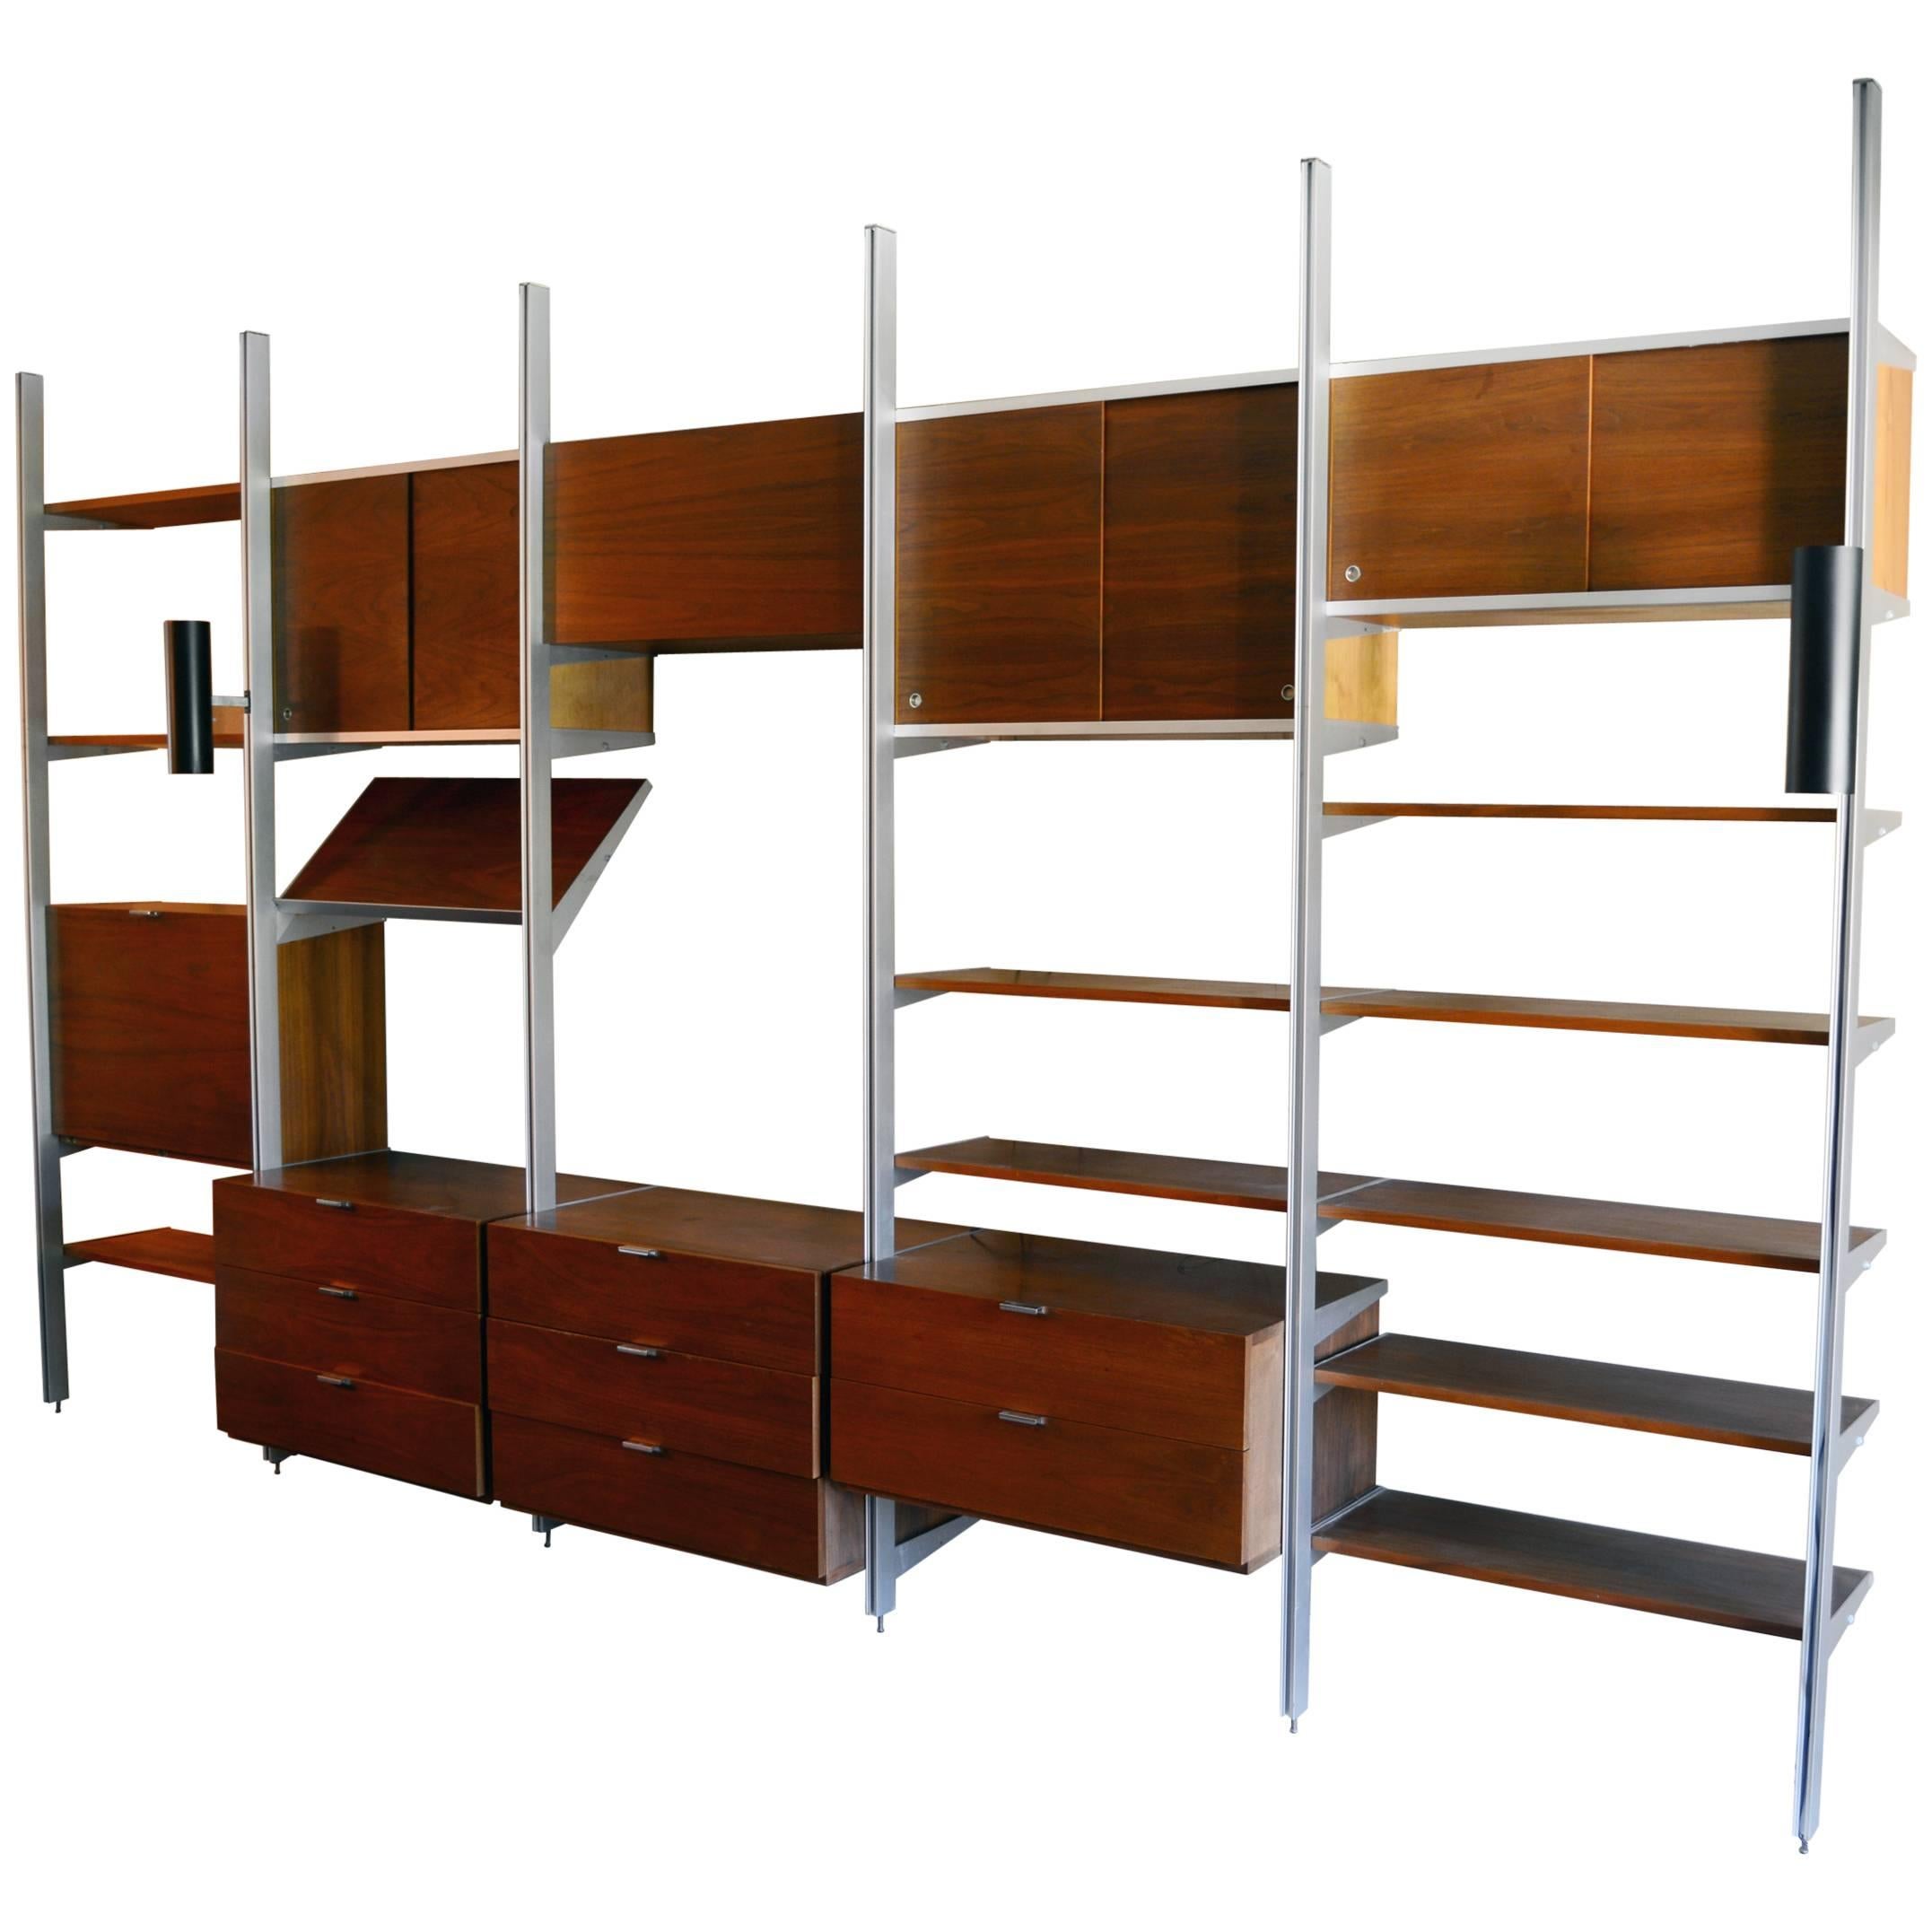 George Nelson Five Bay CSS Wall Unit